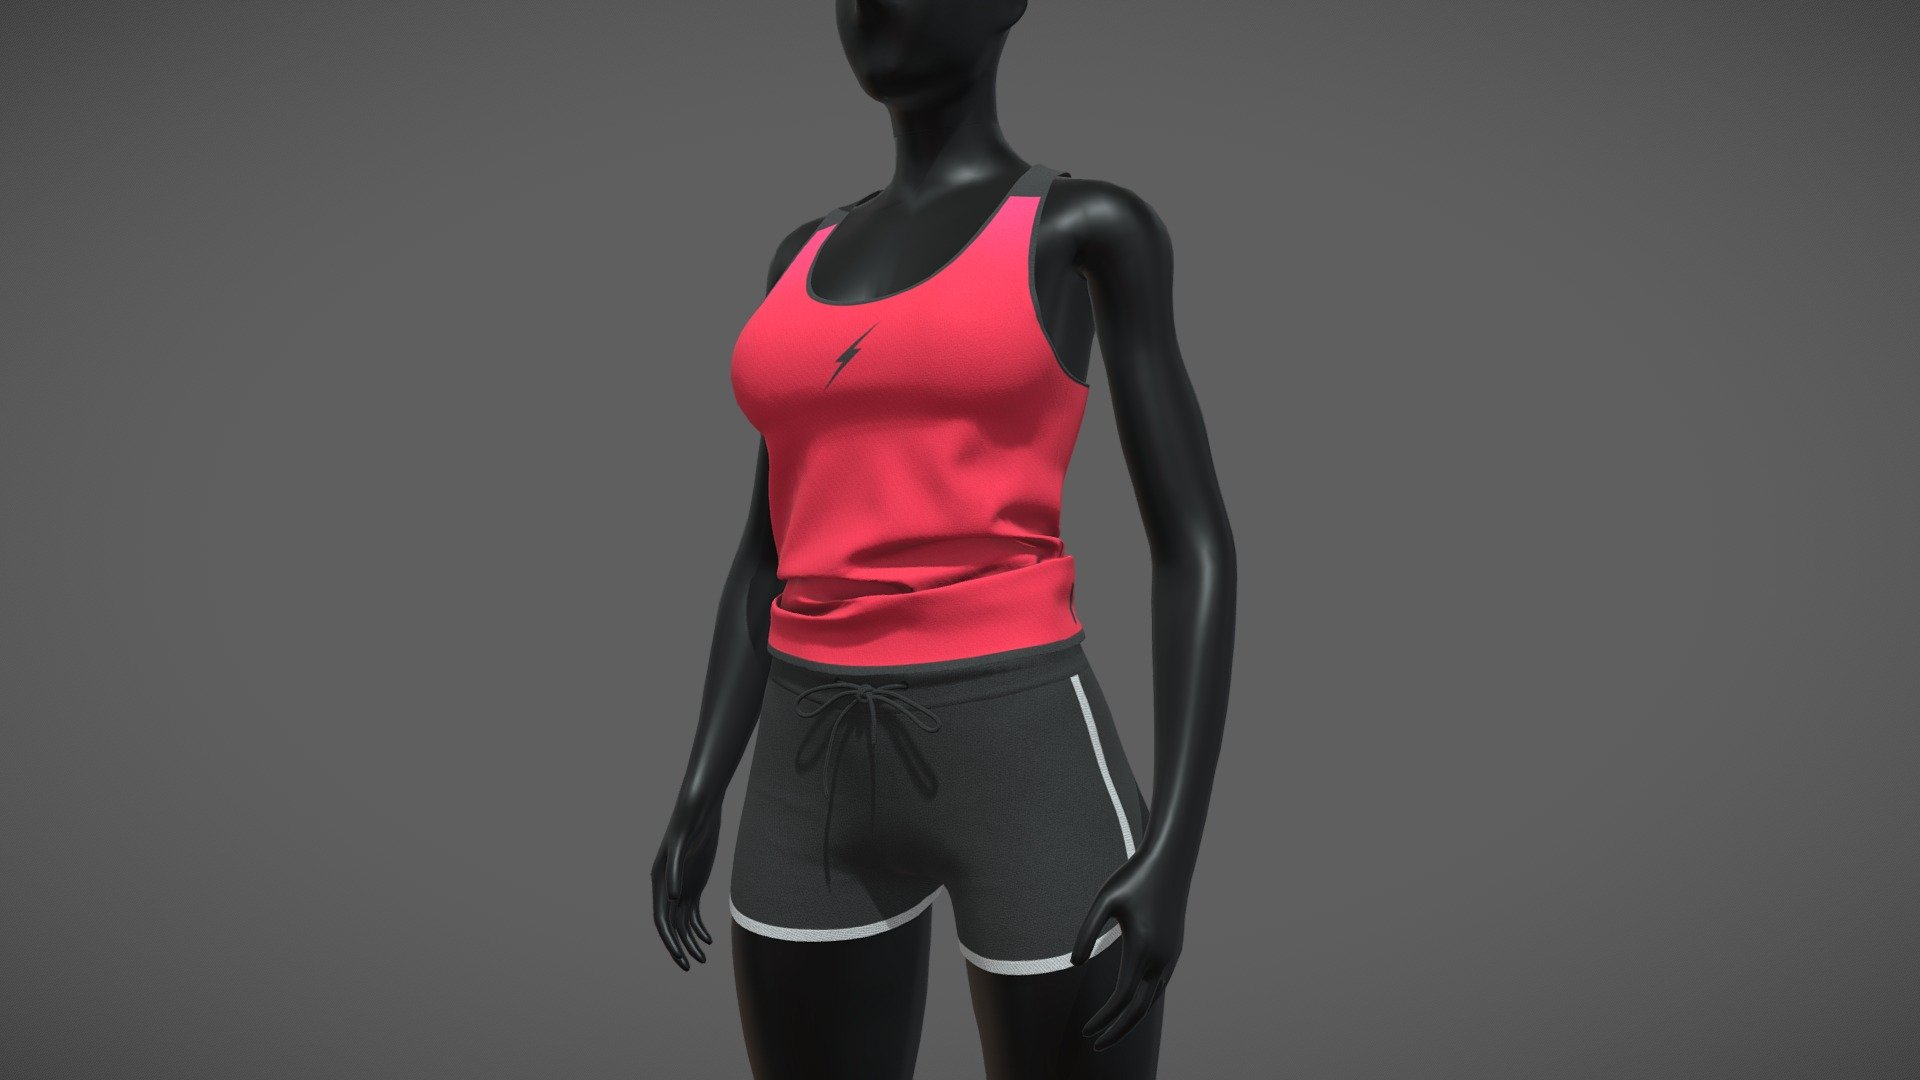 Women Sports Outfit - Free 3D Model by abuvalove